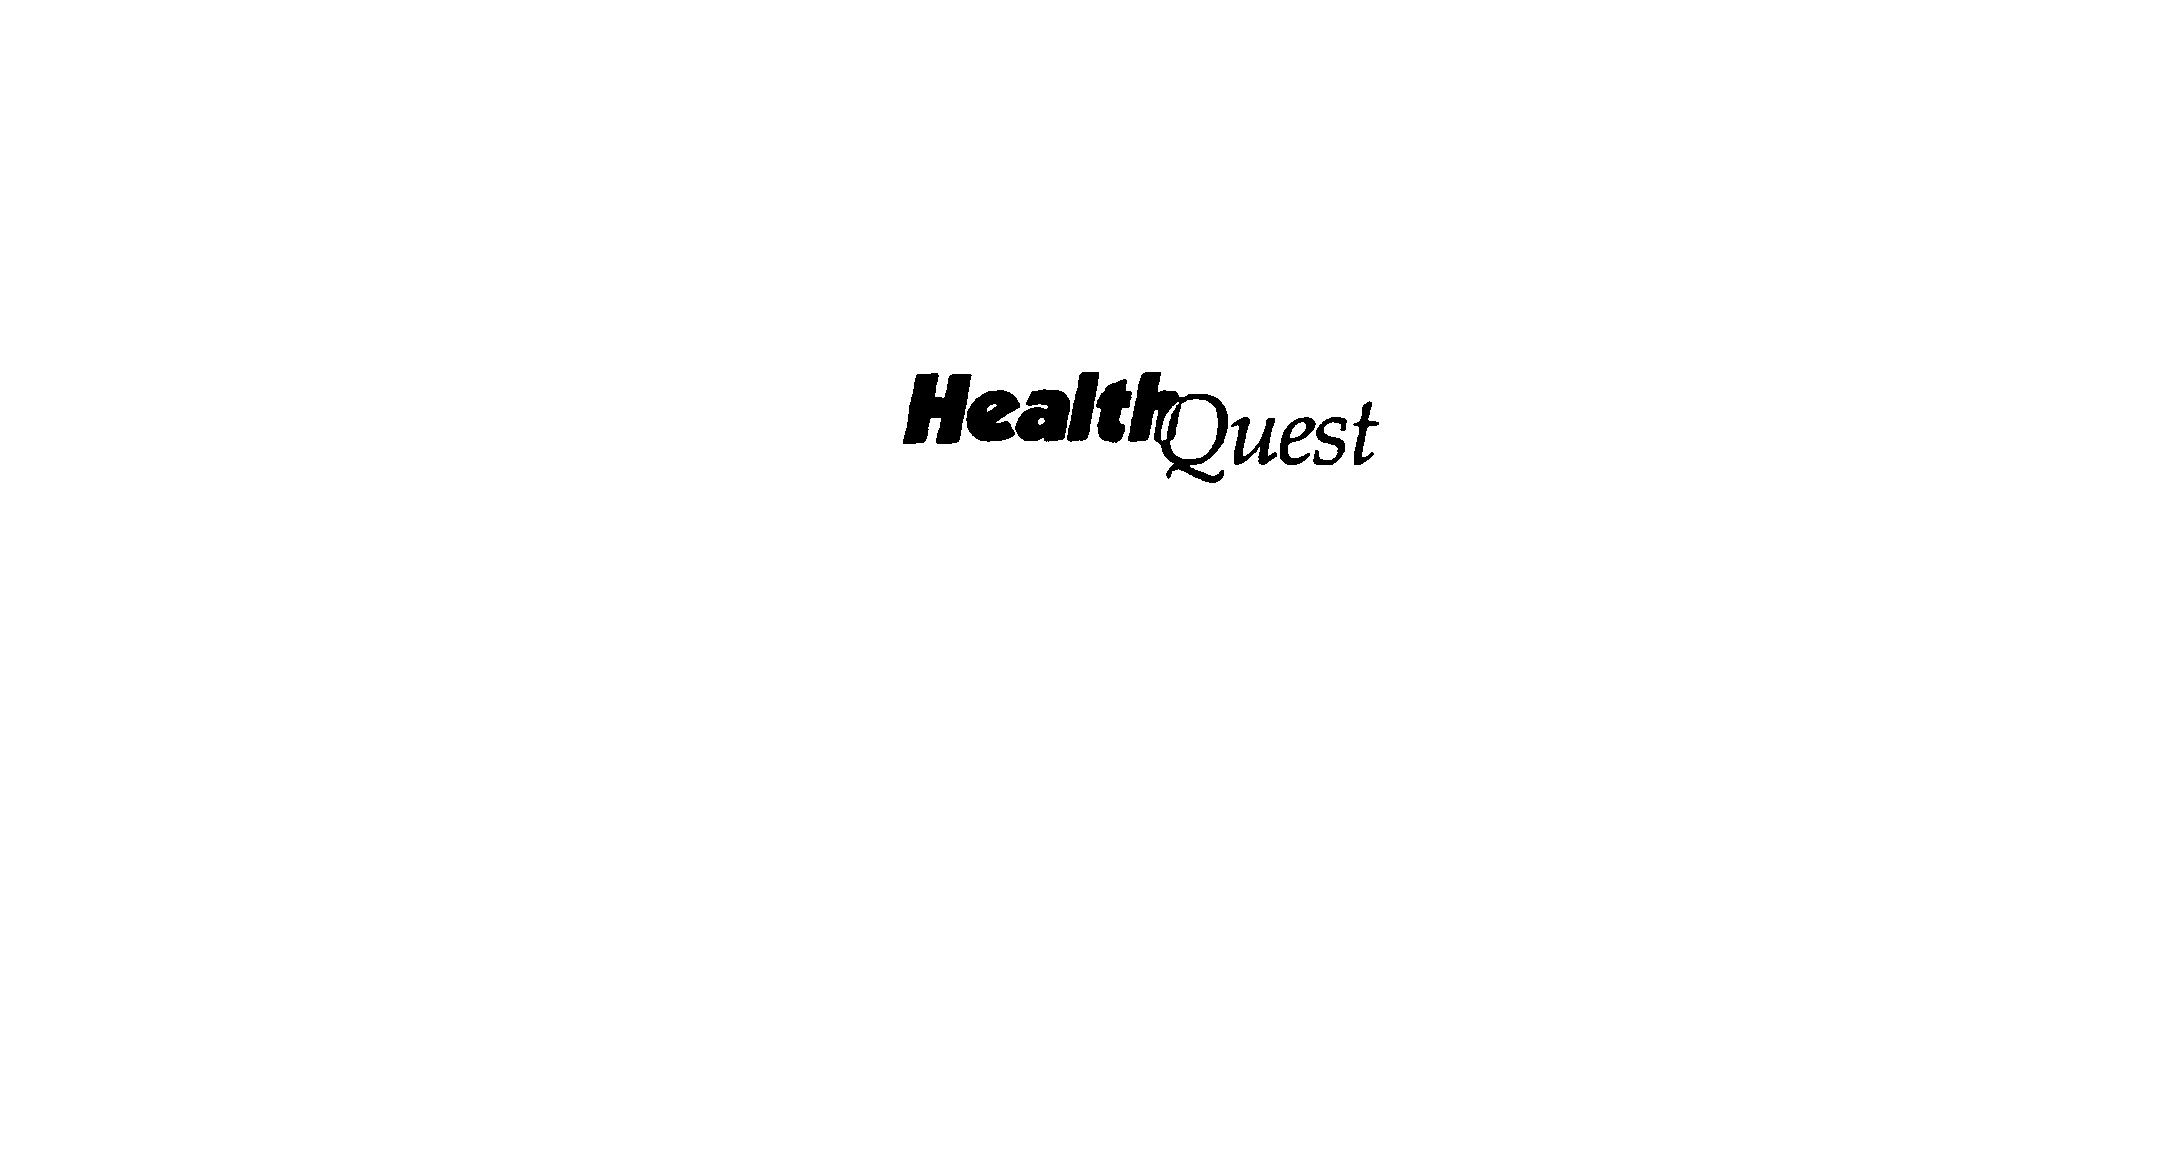 HEALTHQUEST